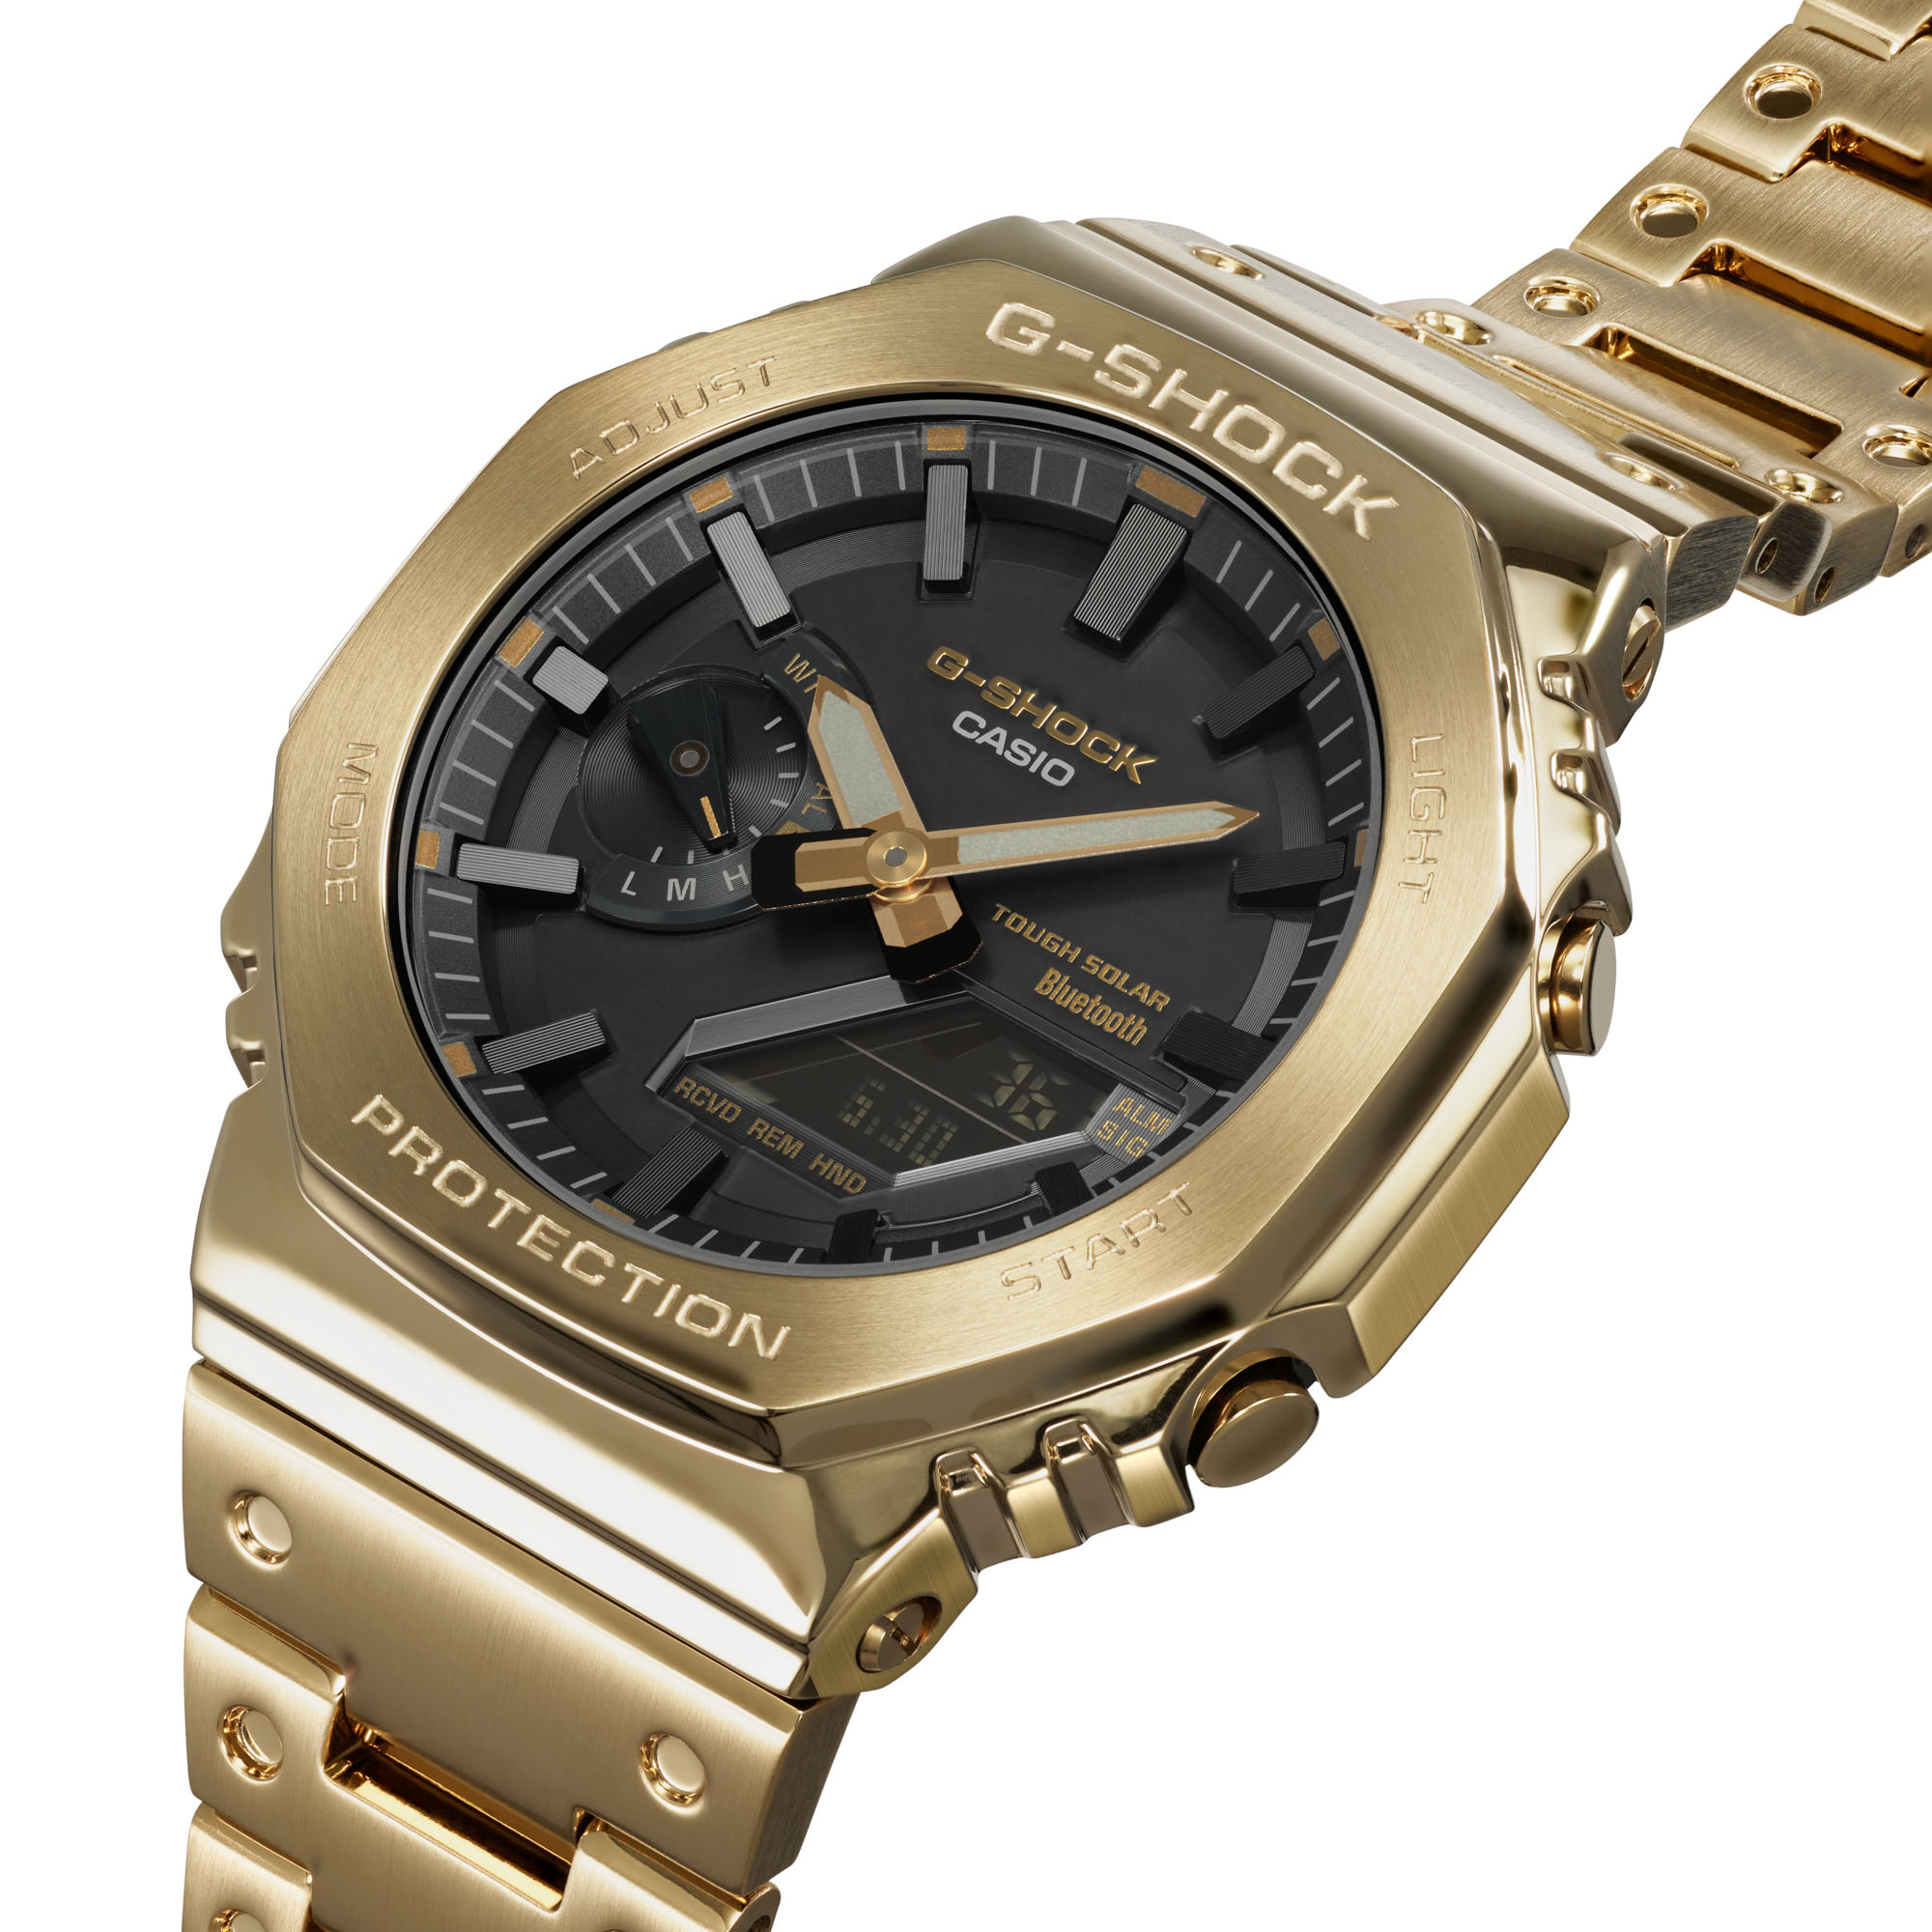 Expands Watch First The | All-Gold Its Line Look: GMB2100GD-9A aBlogtoWatch G-Shock With